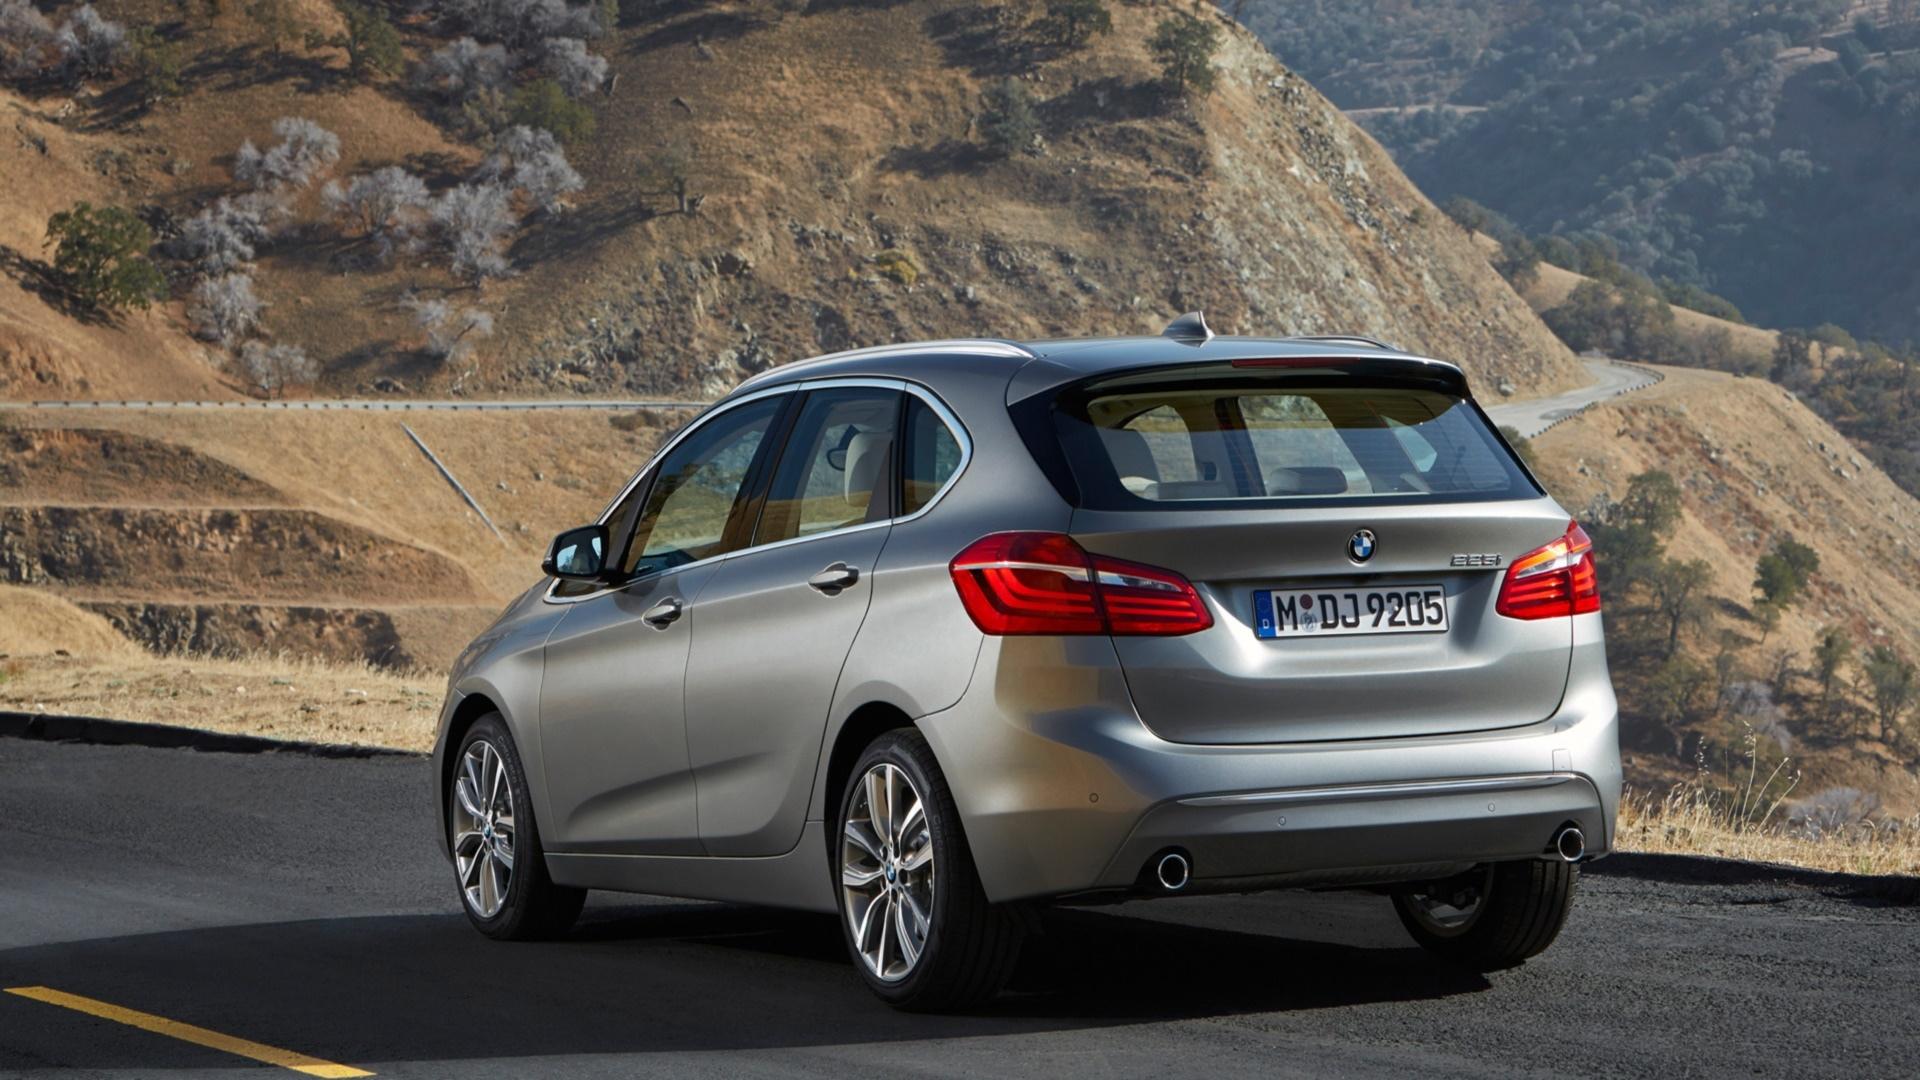 2015 BMW 2-series Active Tourer wallpapers HD quality